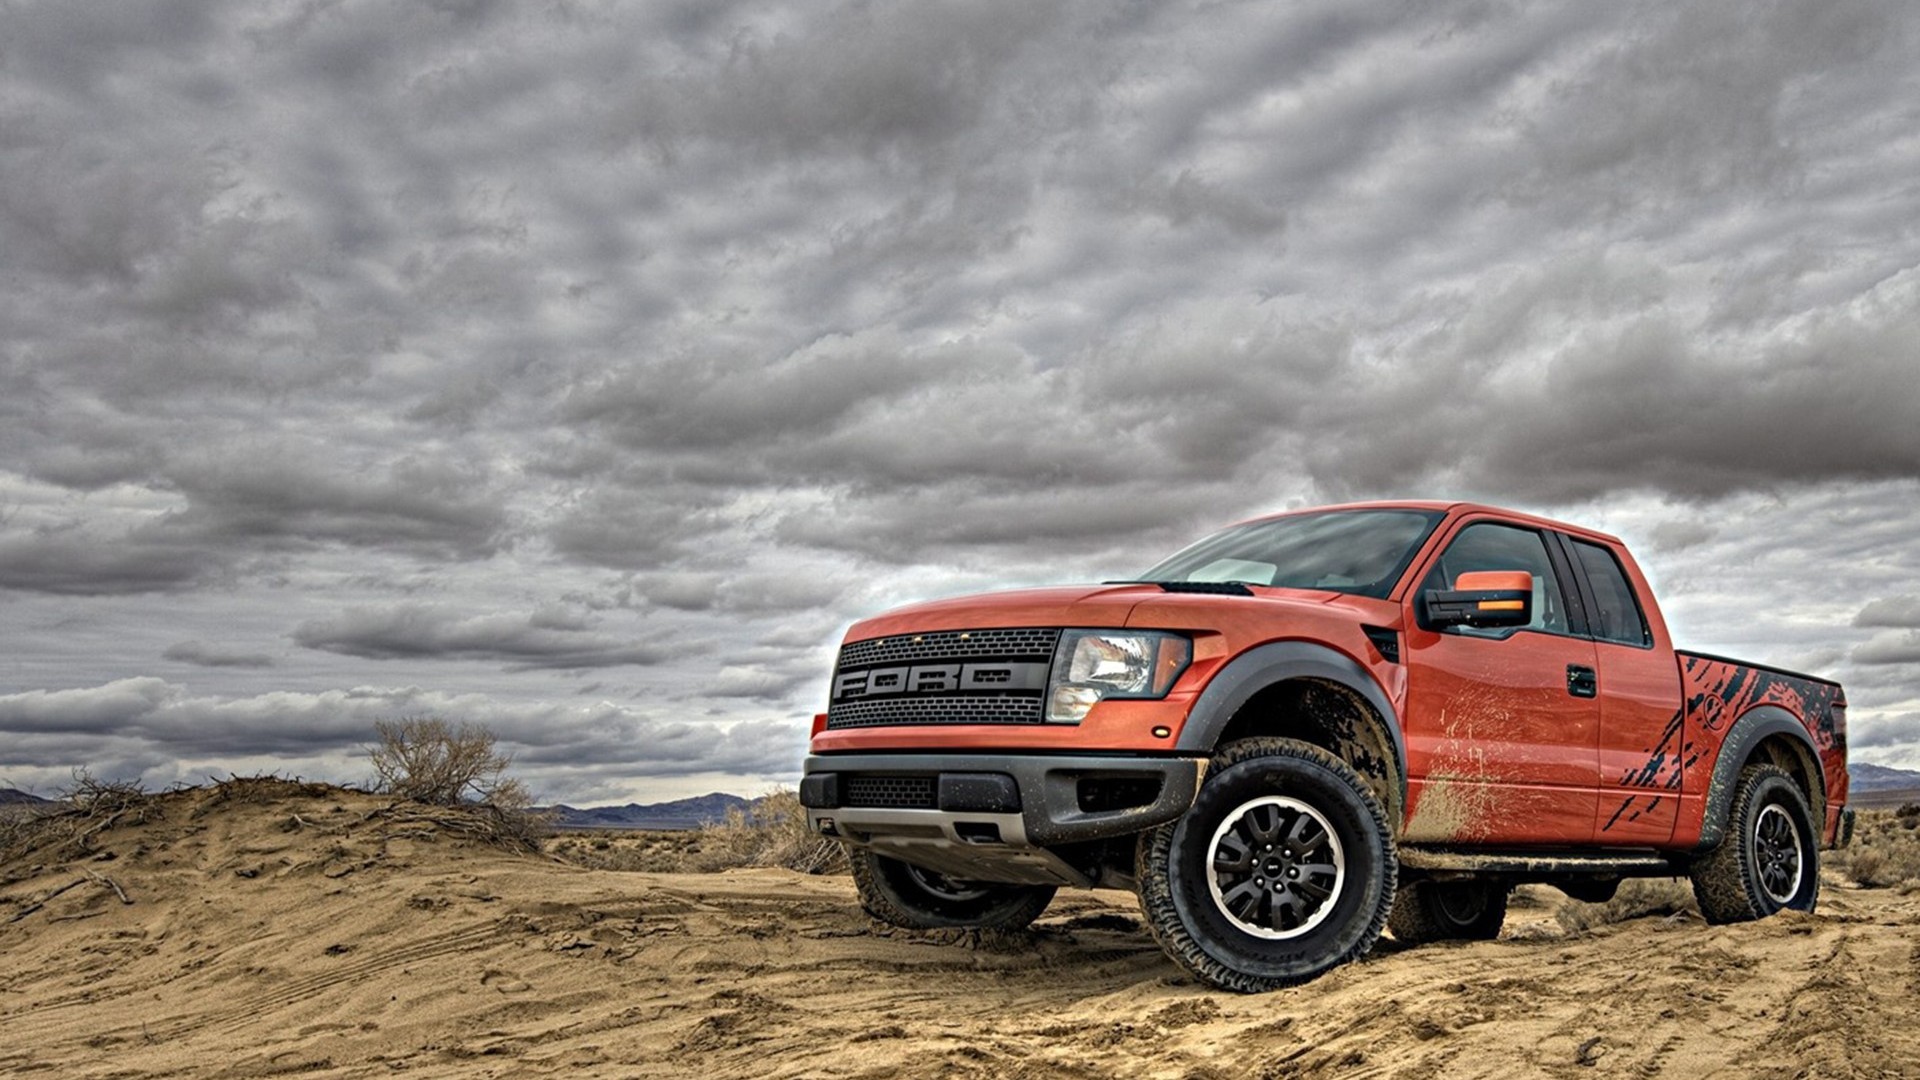 1920x1080 Search Results for “svt ford raptor wallpaper” – Adorable Wallpapers